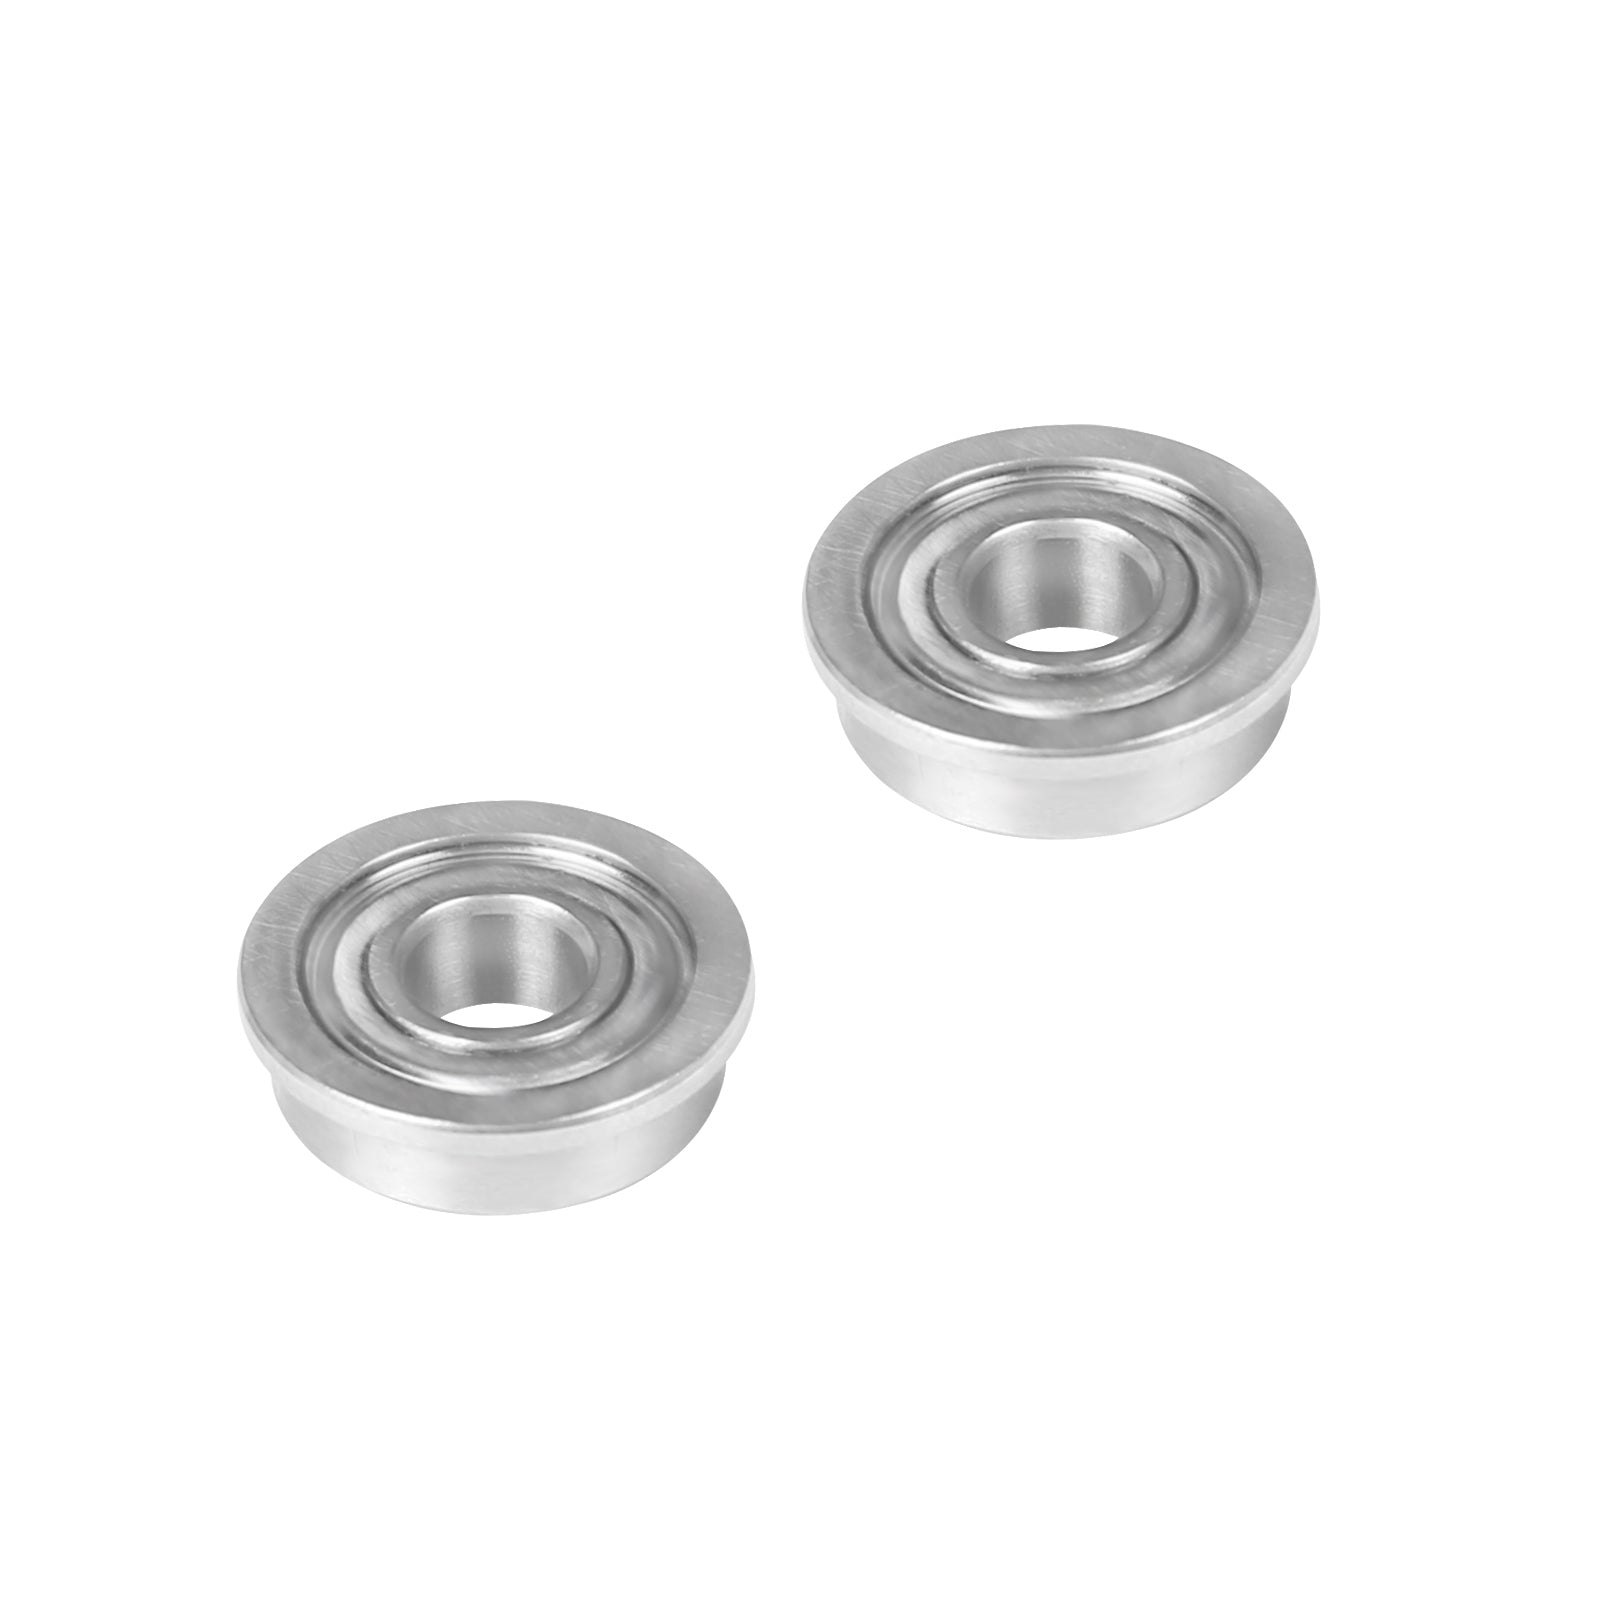 OMP HOBBY M7 Helicopter Parts Flanged Bearing _6x_15x5 OSHM7154